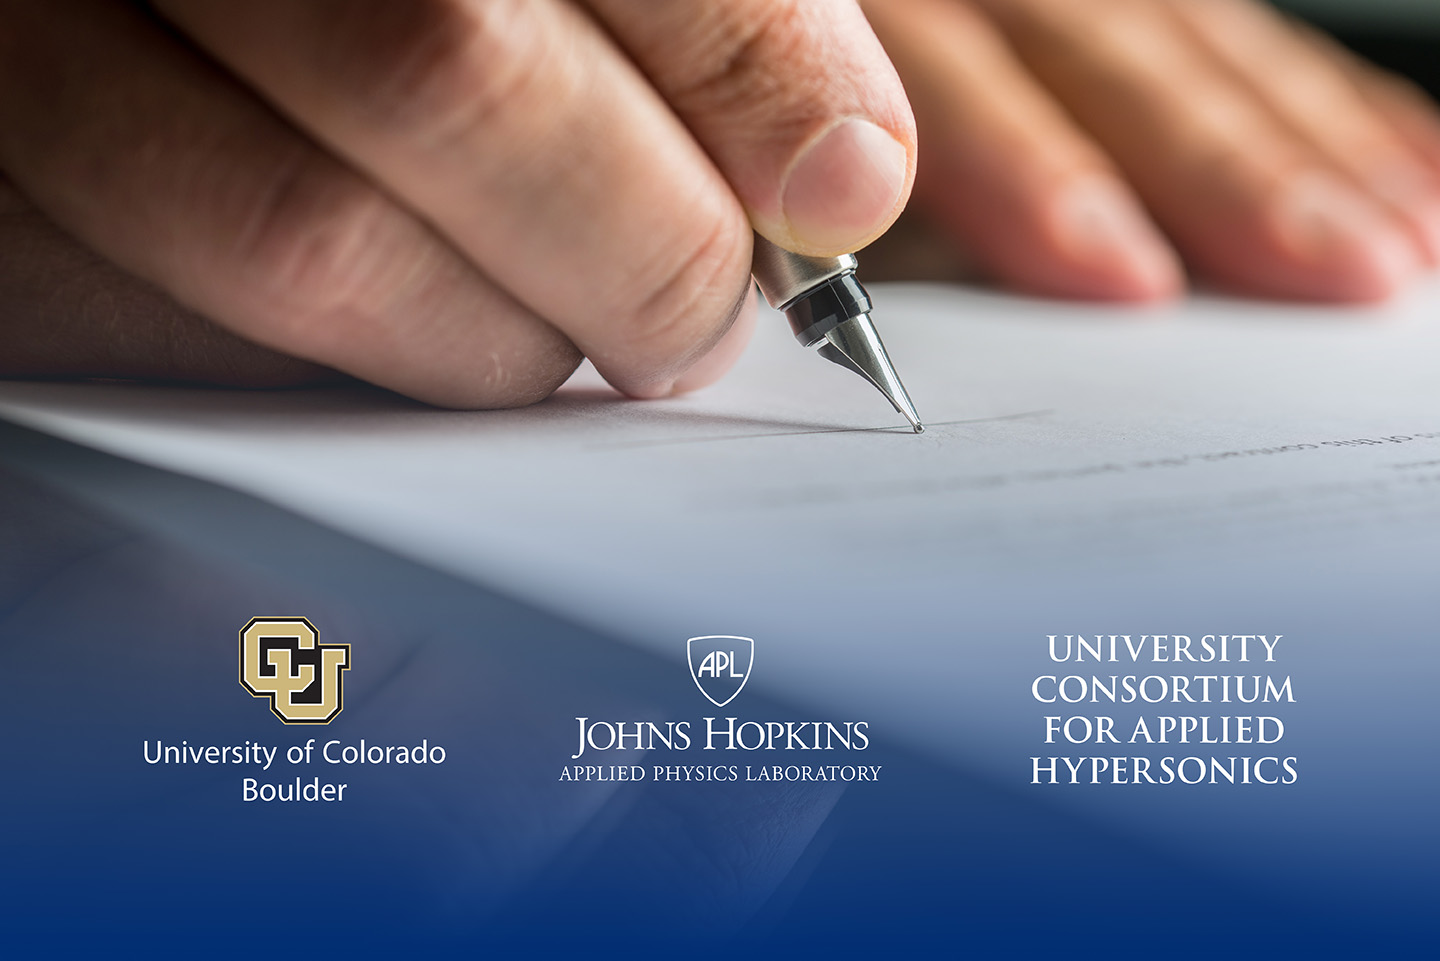 Logos for Johns Hopkins APL, CU Boulder, and the University Consortium for Applied Hypersonics overlaid on an image of a person signing a contract.